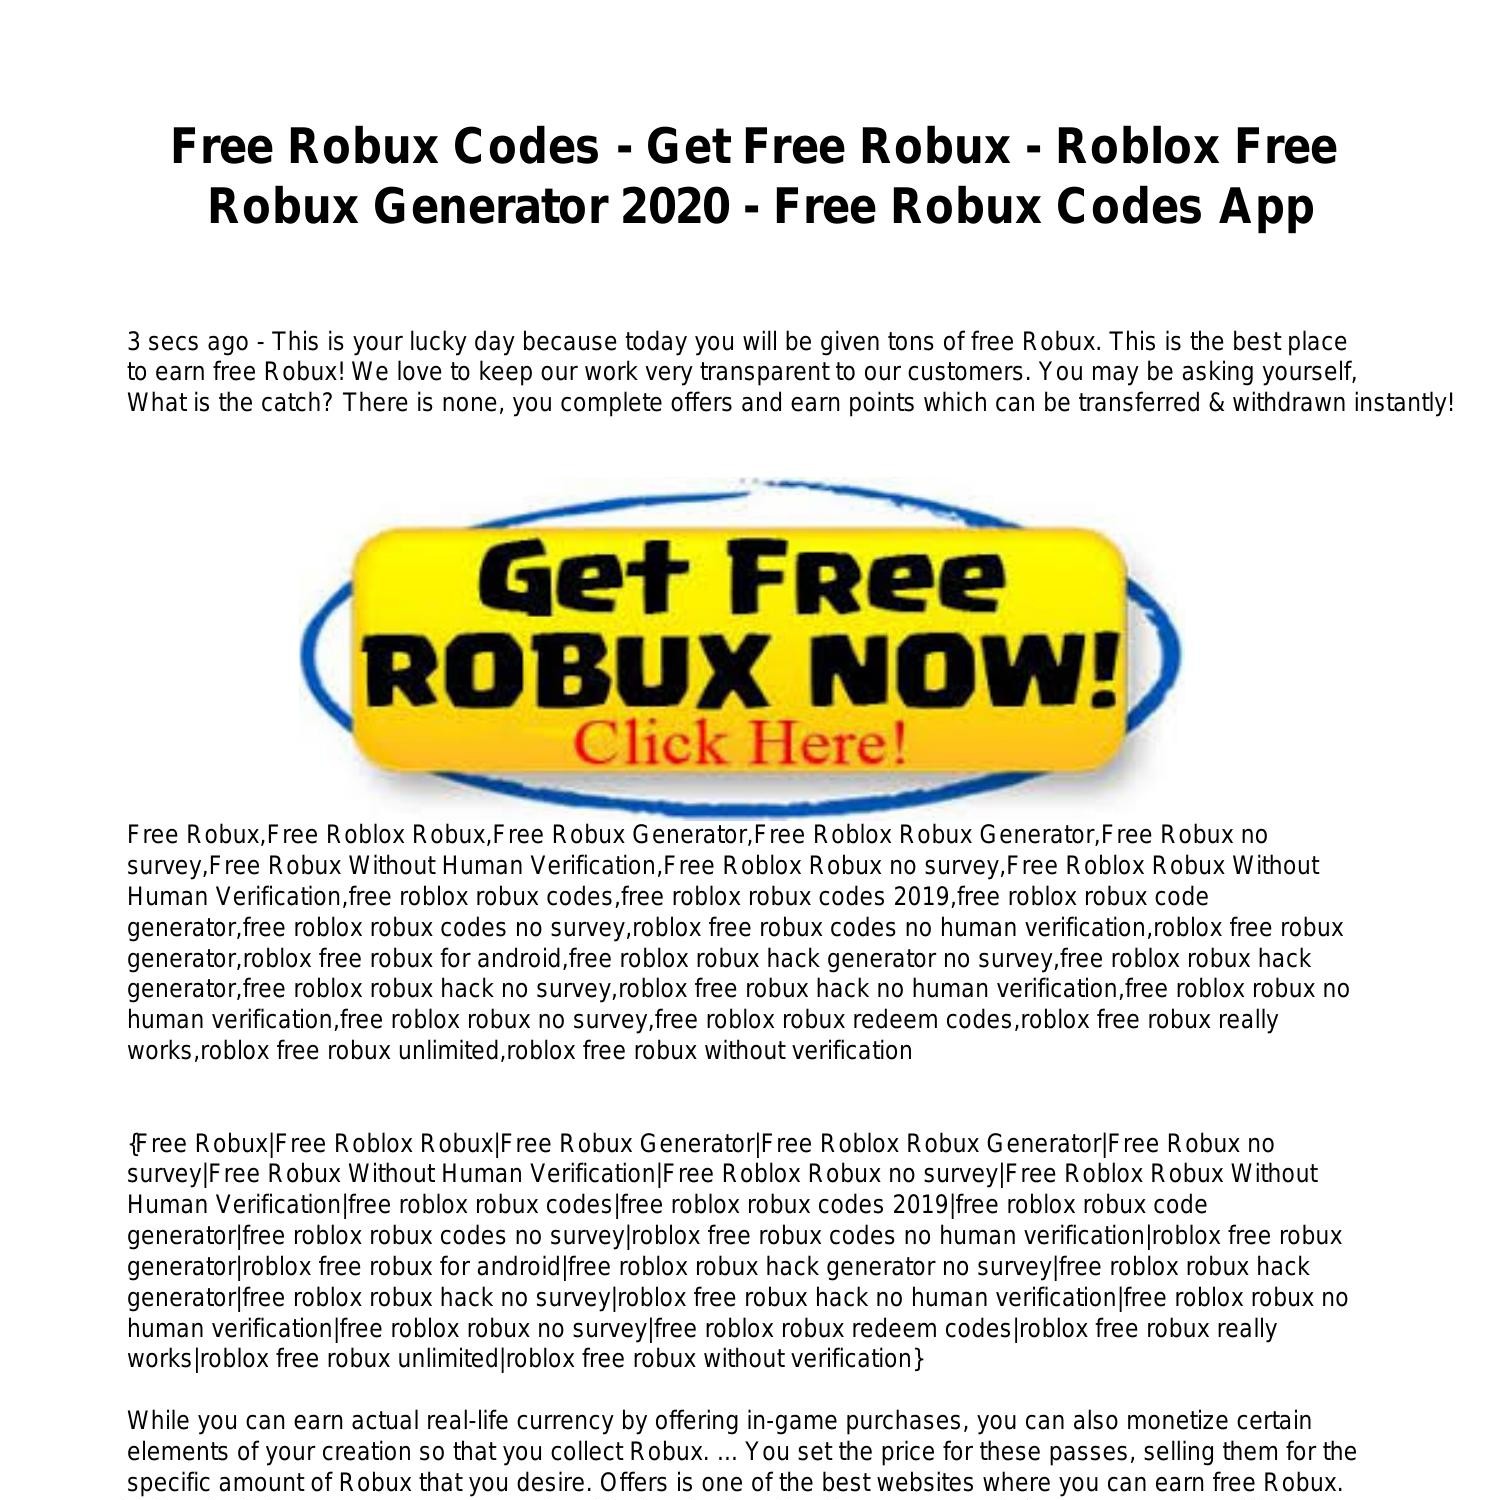 Roblox Codes To Get Free Robux